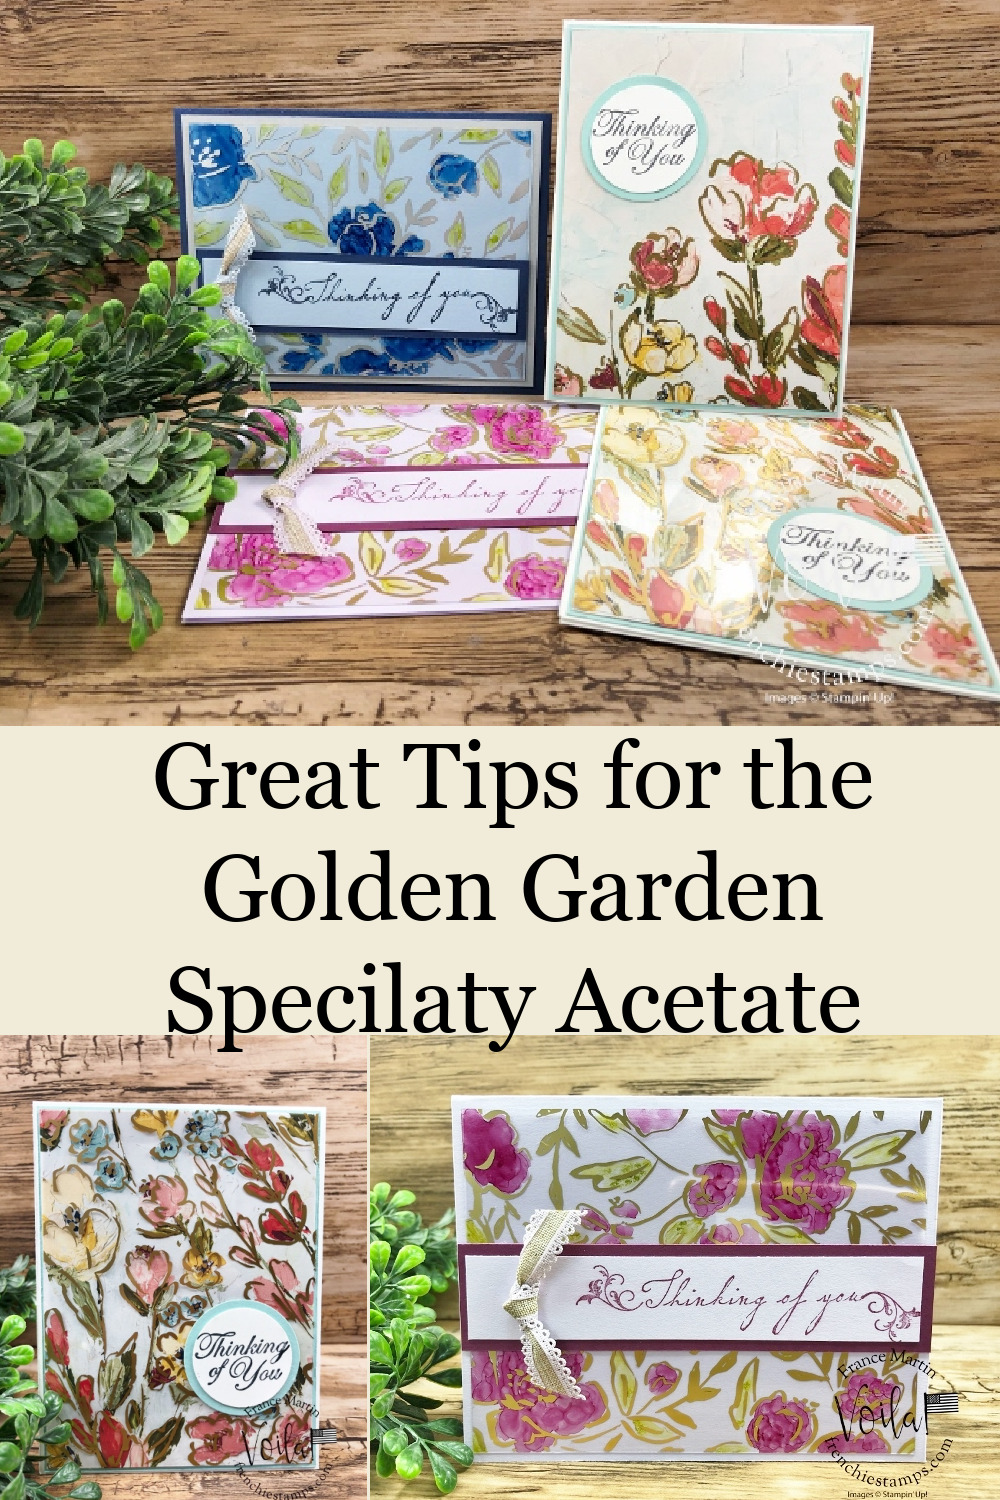 Tips with the Golden Garden Specialty Acetate